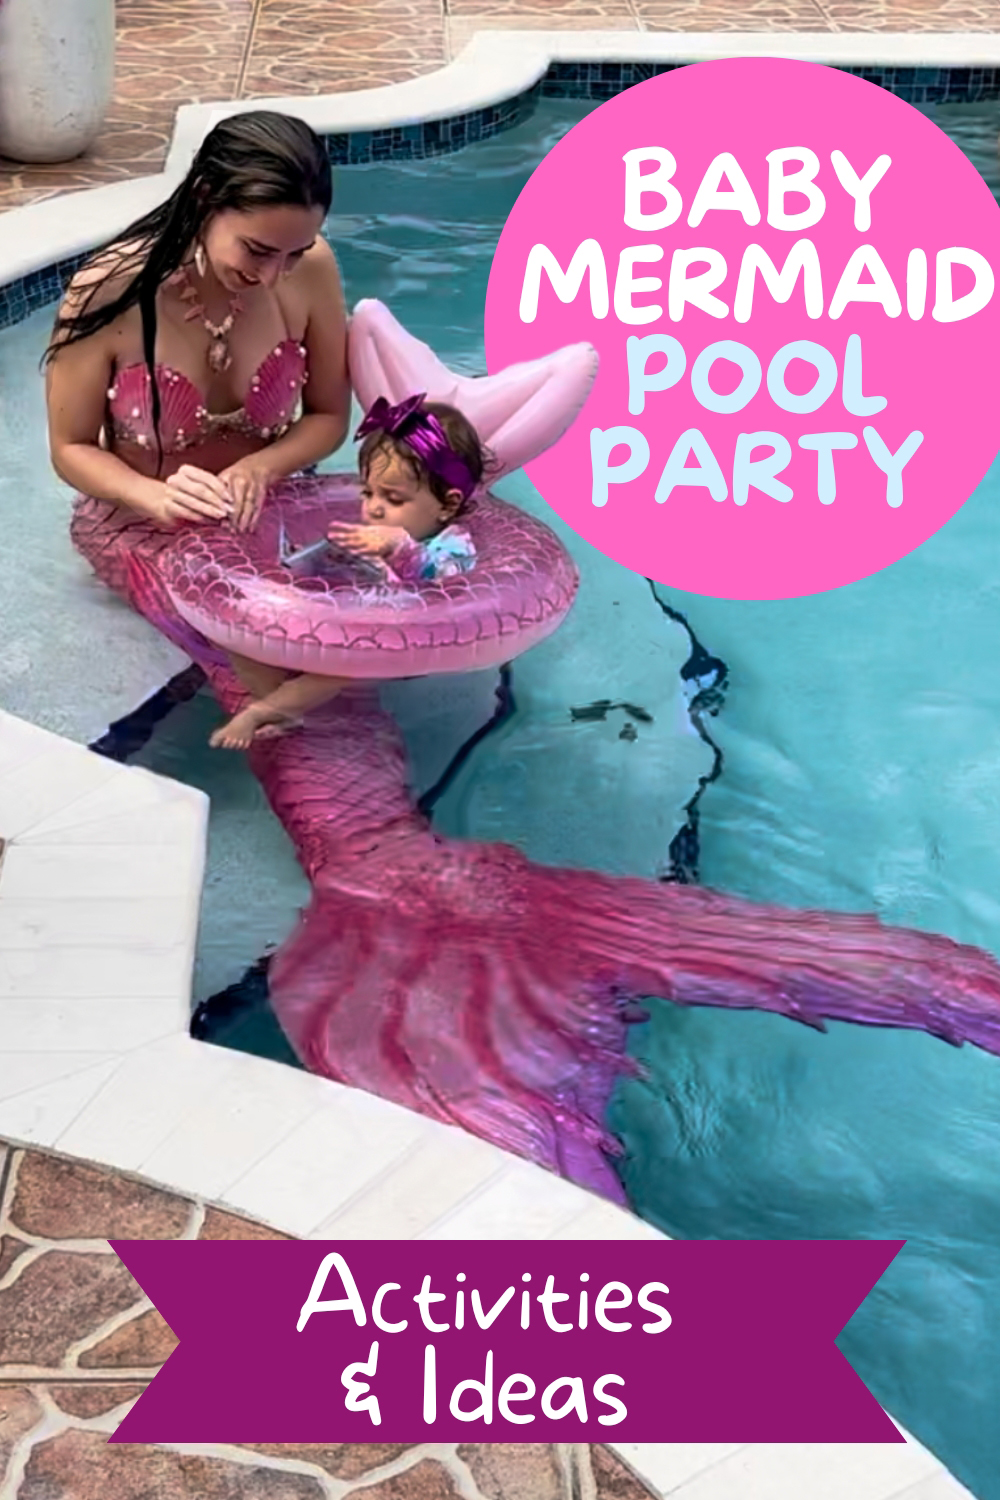 BEST Baby Pool Party ideas for your little Mermaid's First Birthday!